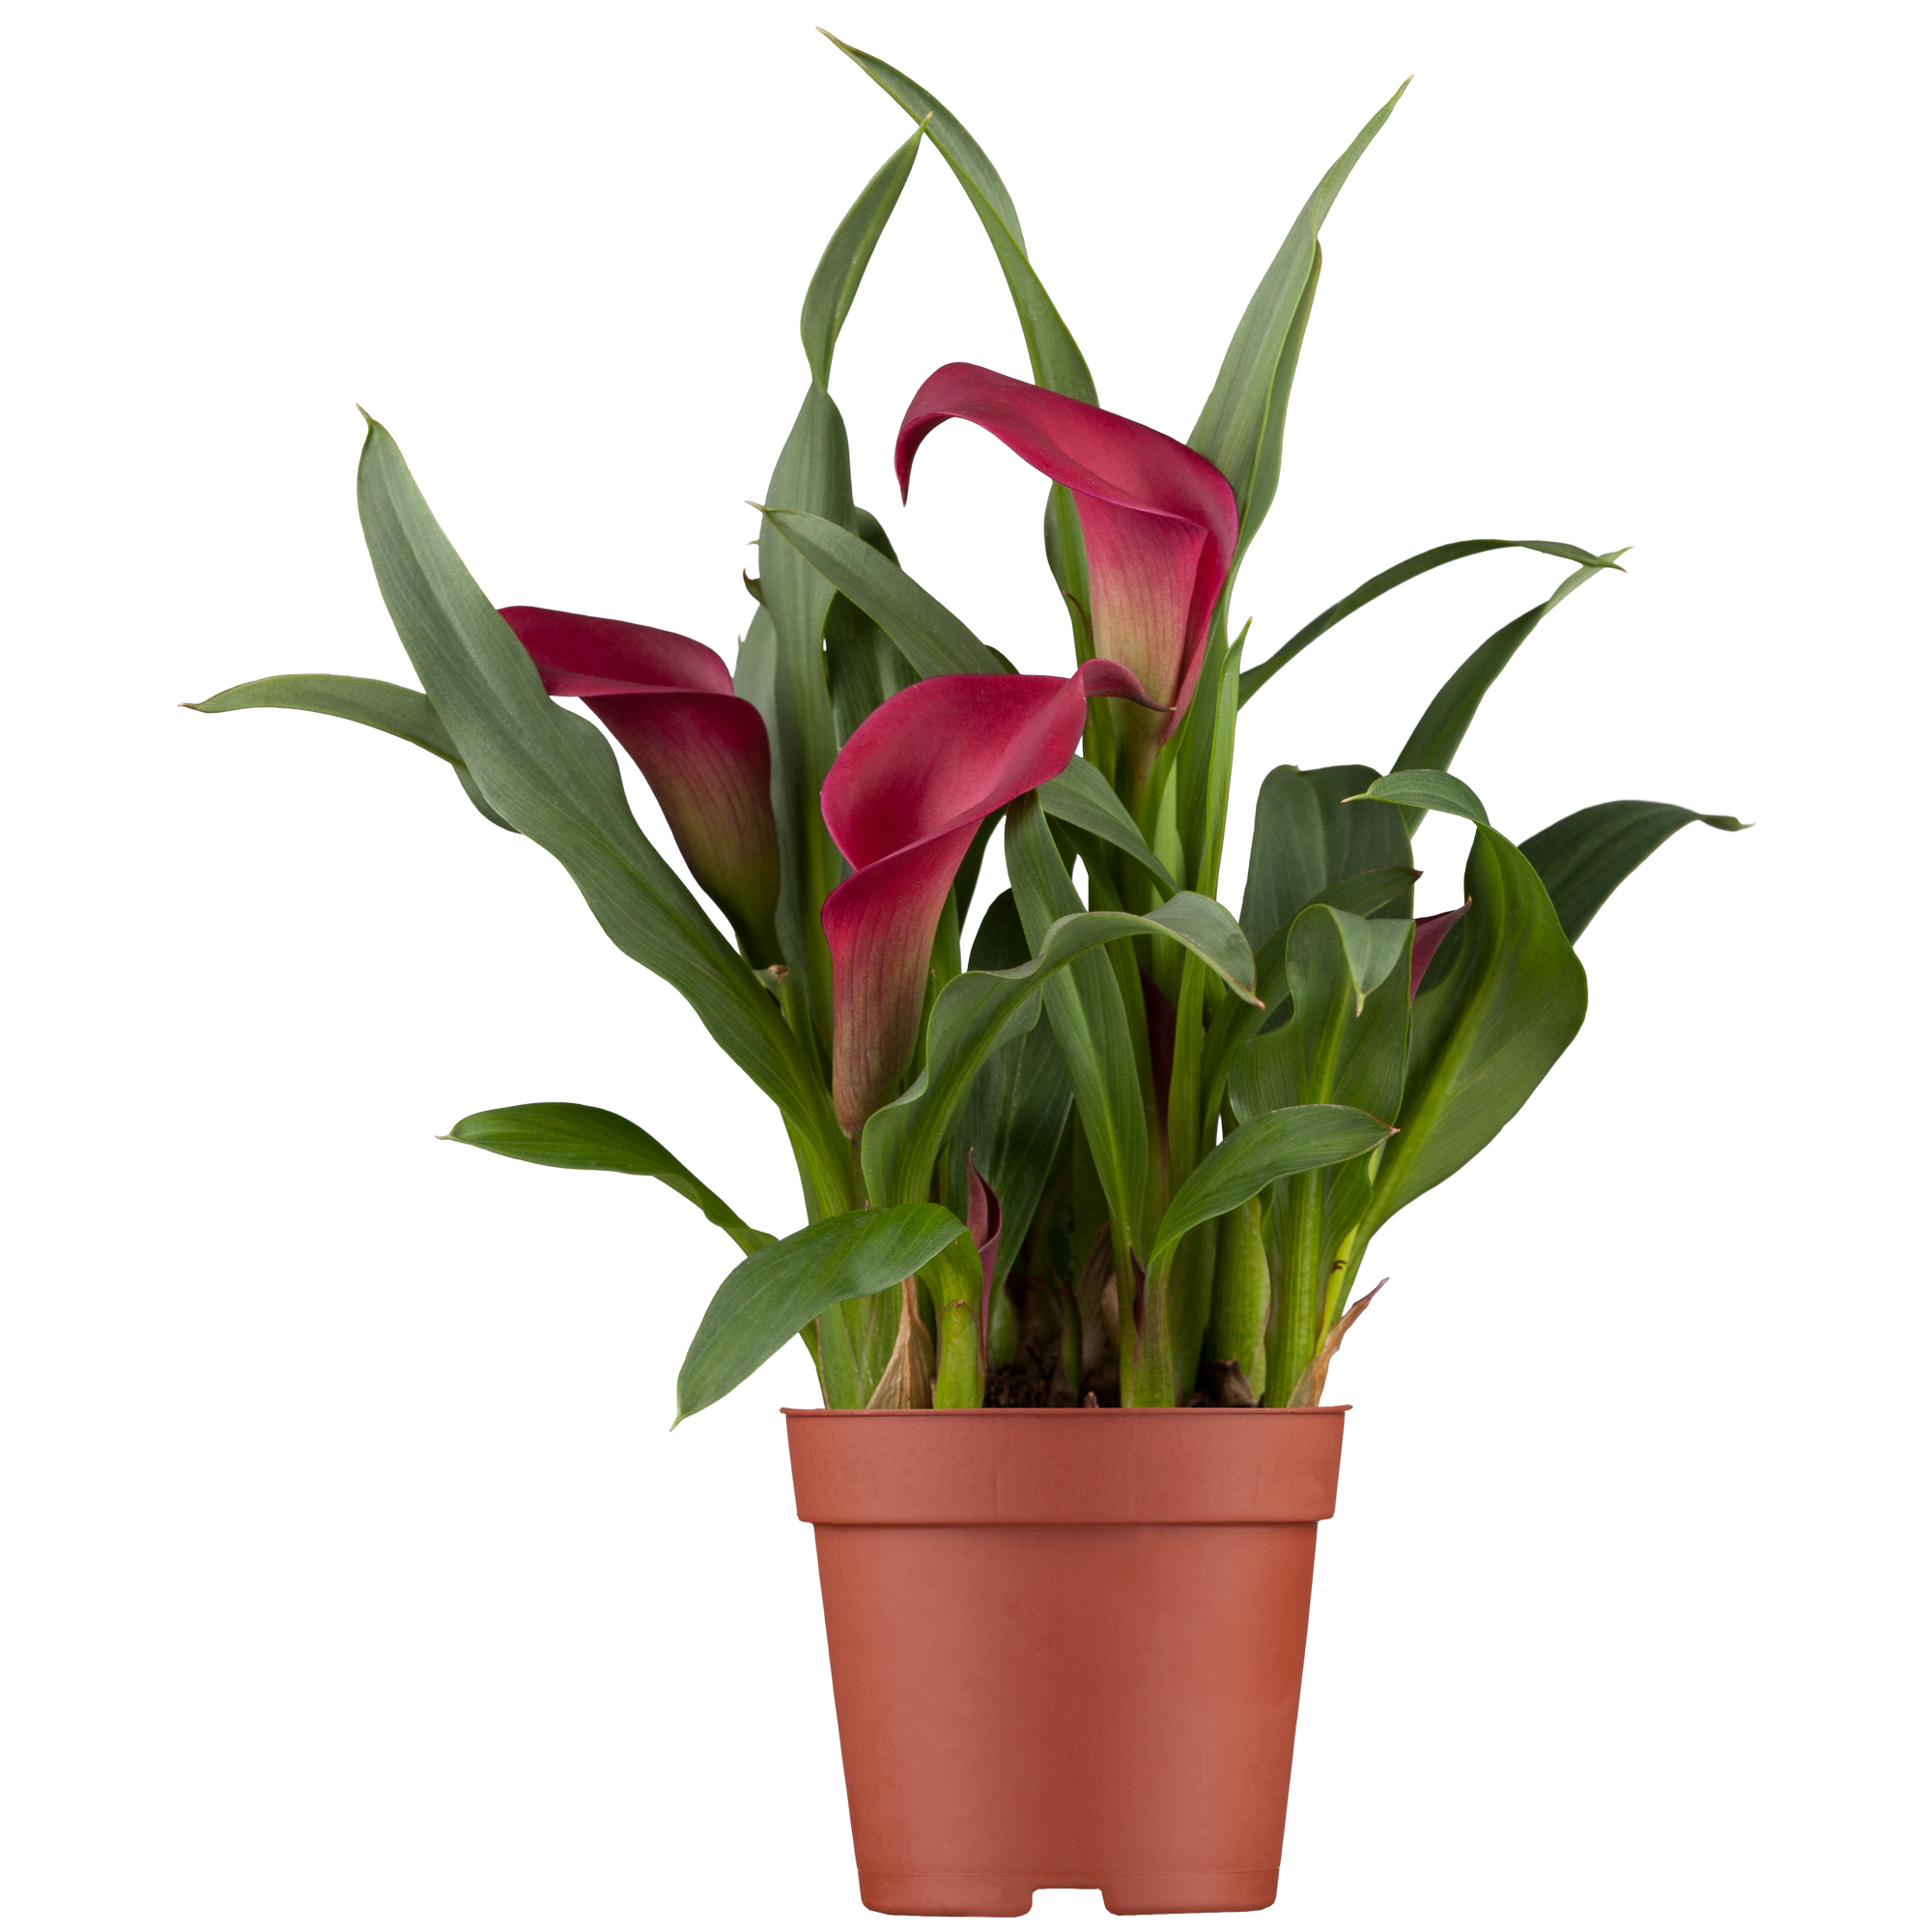 Zimmer-Calla rot, 13 cm Topf + product picture